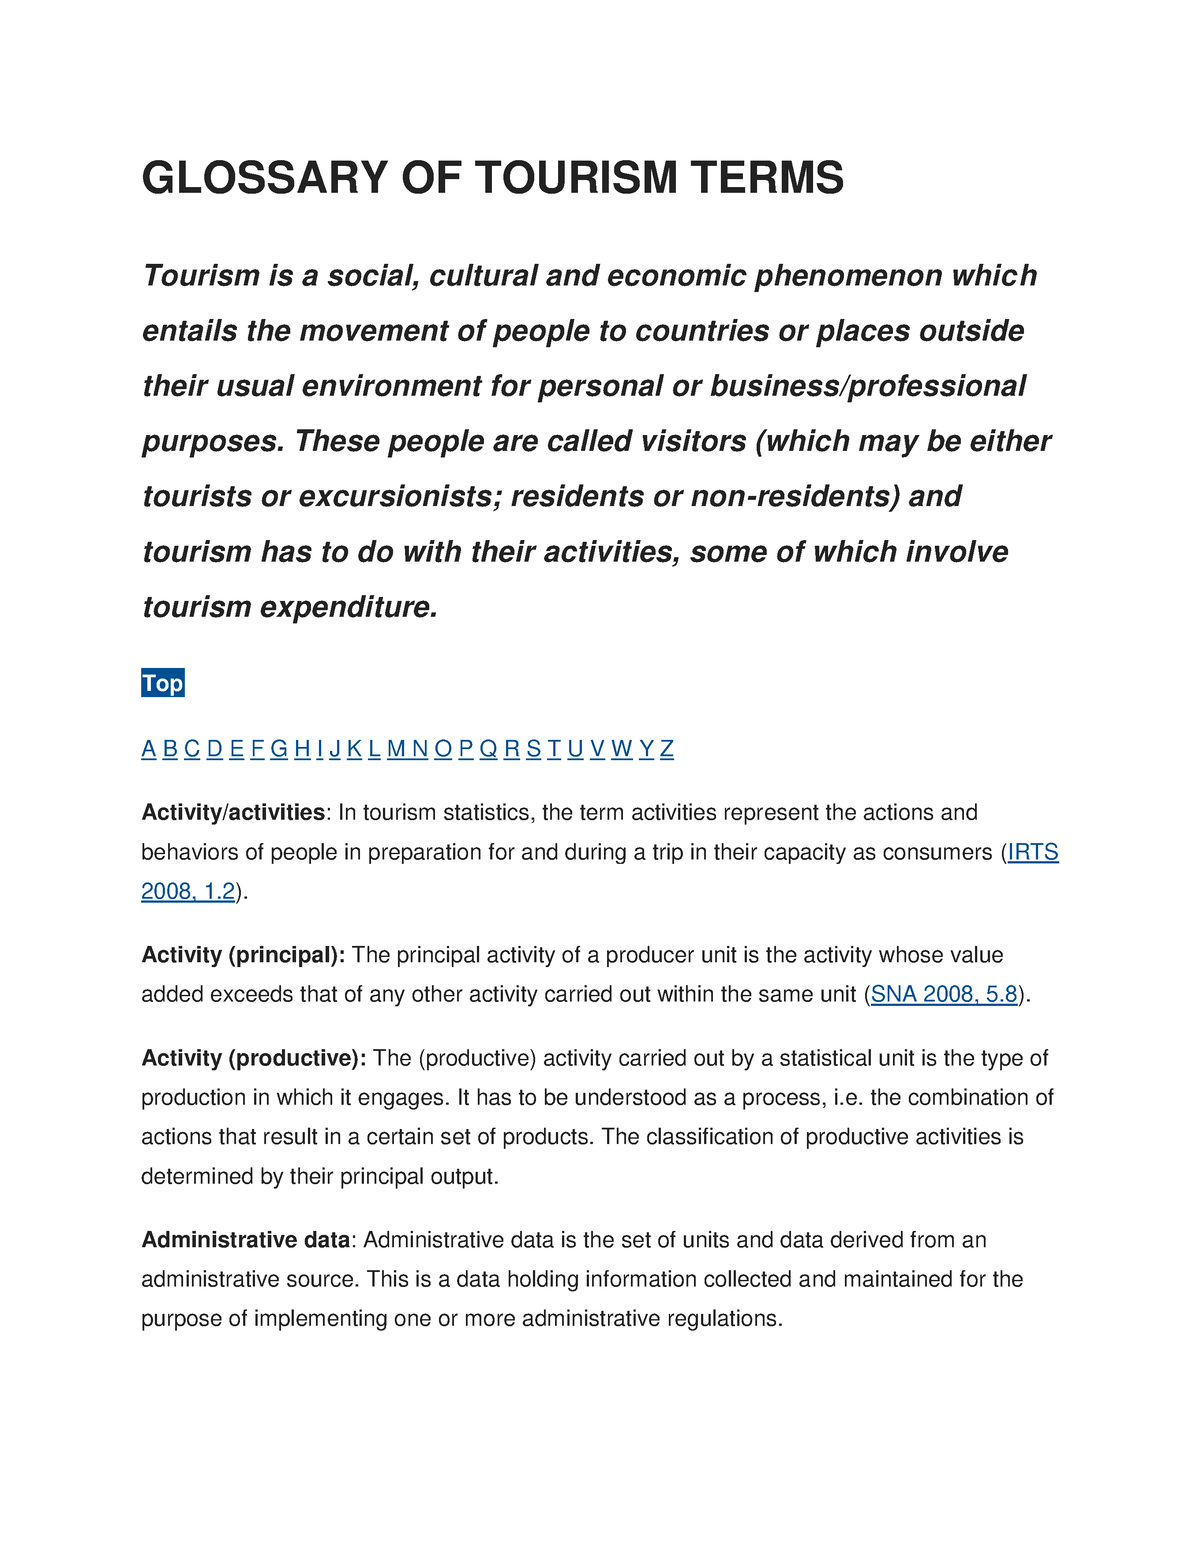 unwto glossary of tourism terms